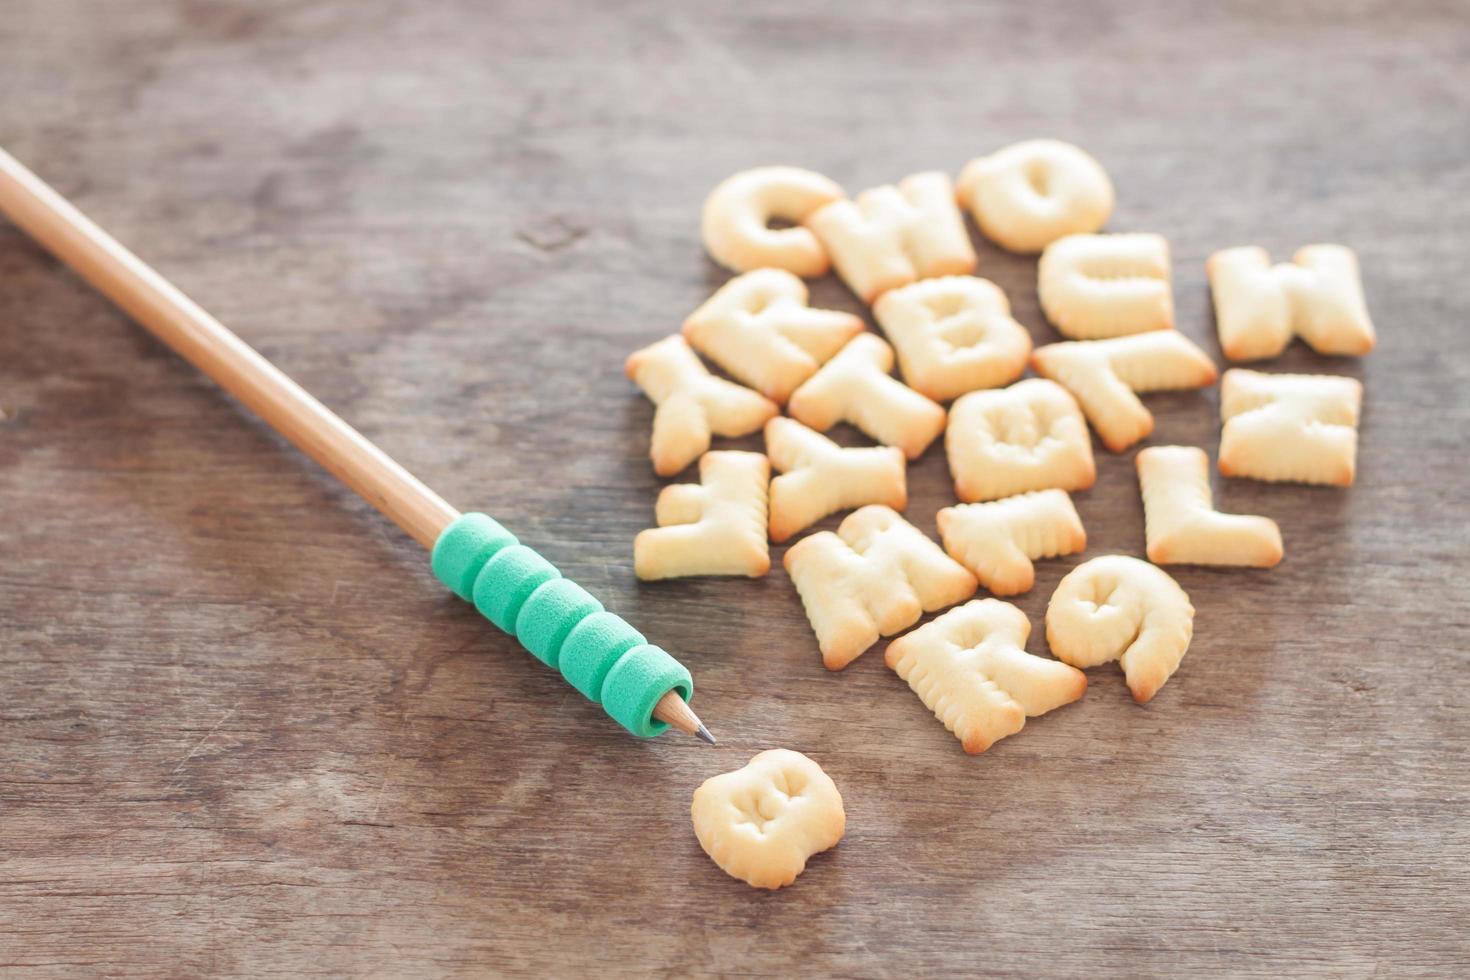 Alphabet biscuits with a pencil photo